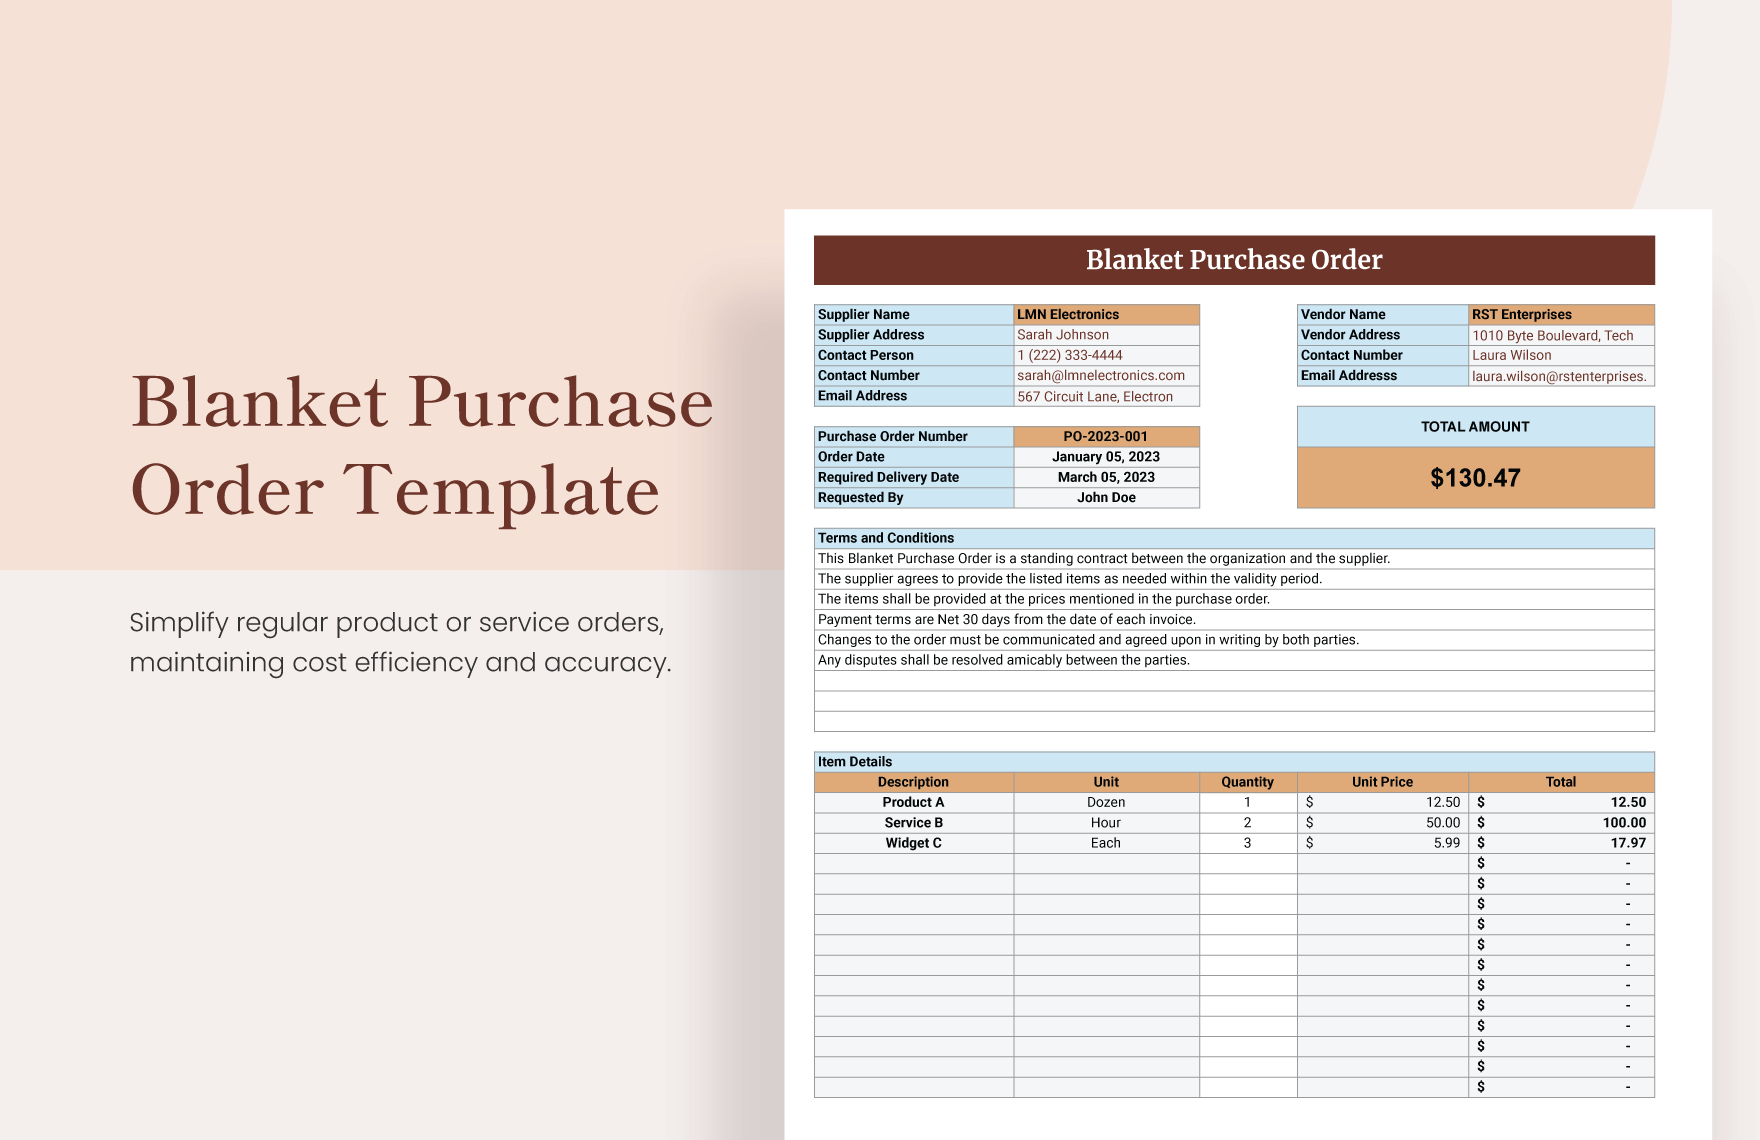 Blanket Purchase Order Template Download in Excel Google Sheets